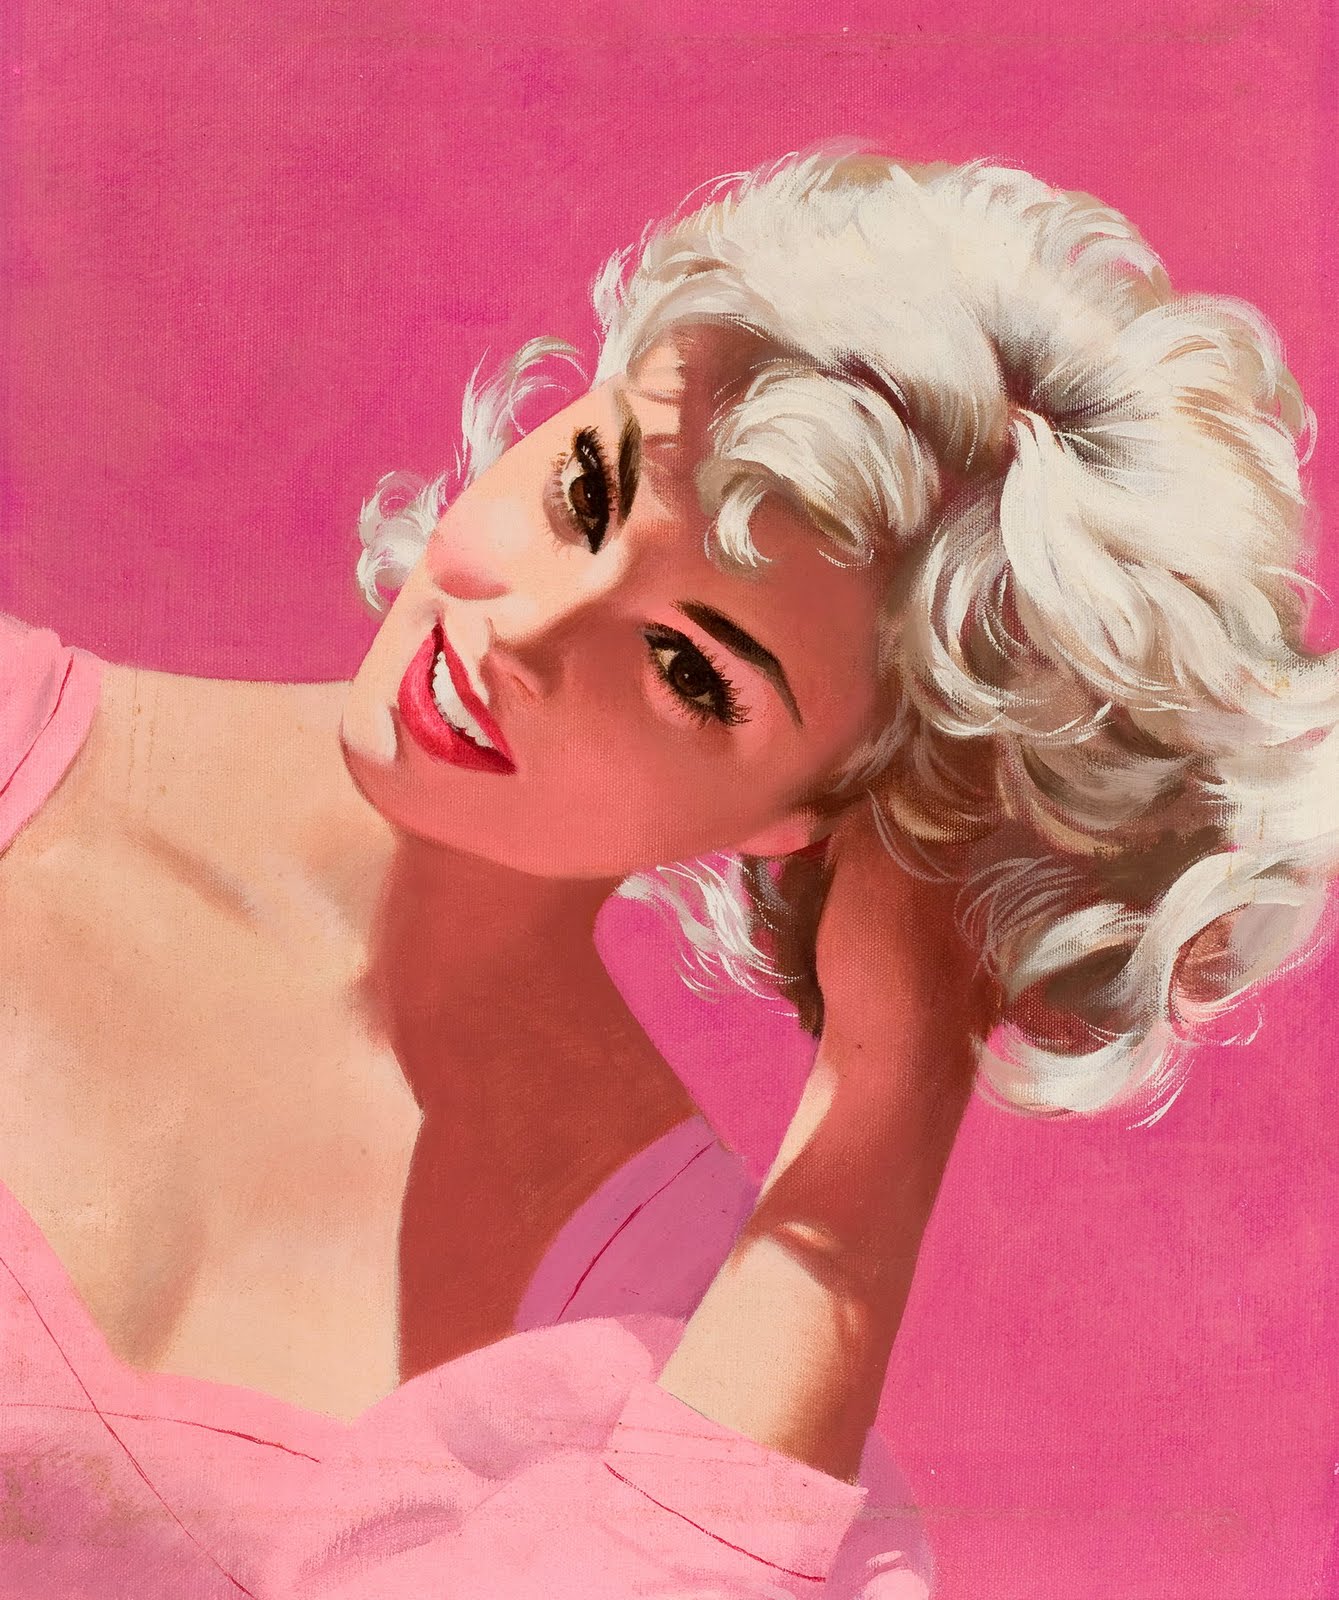 Masters Of Illustrations Jon Whitcomb Pin Up And Cartoon Girls Art Vintage And Modern Artworks